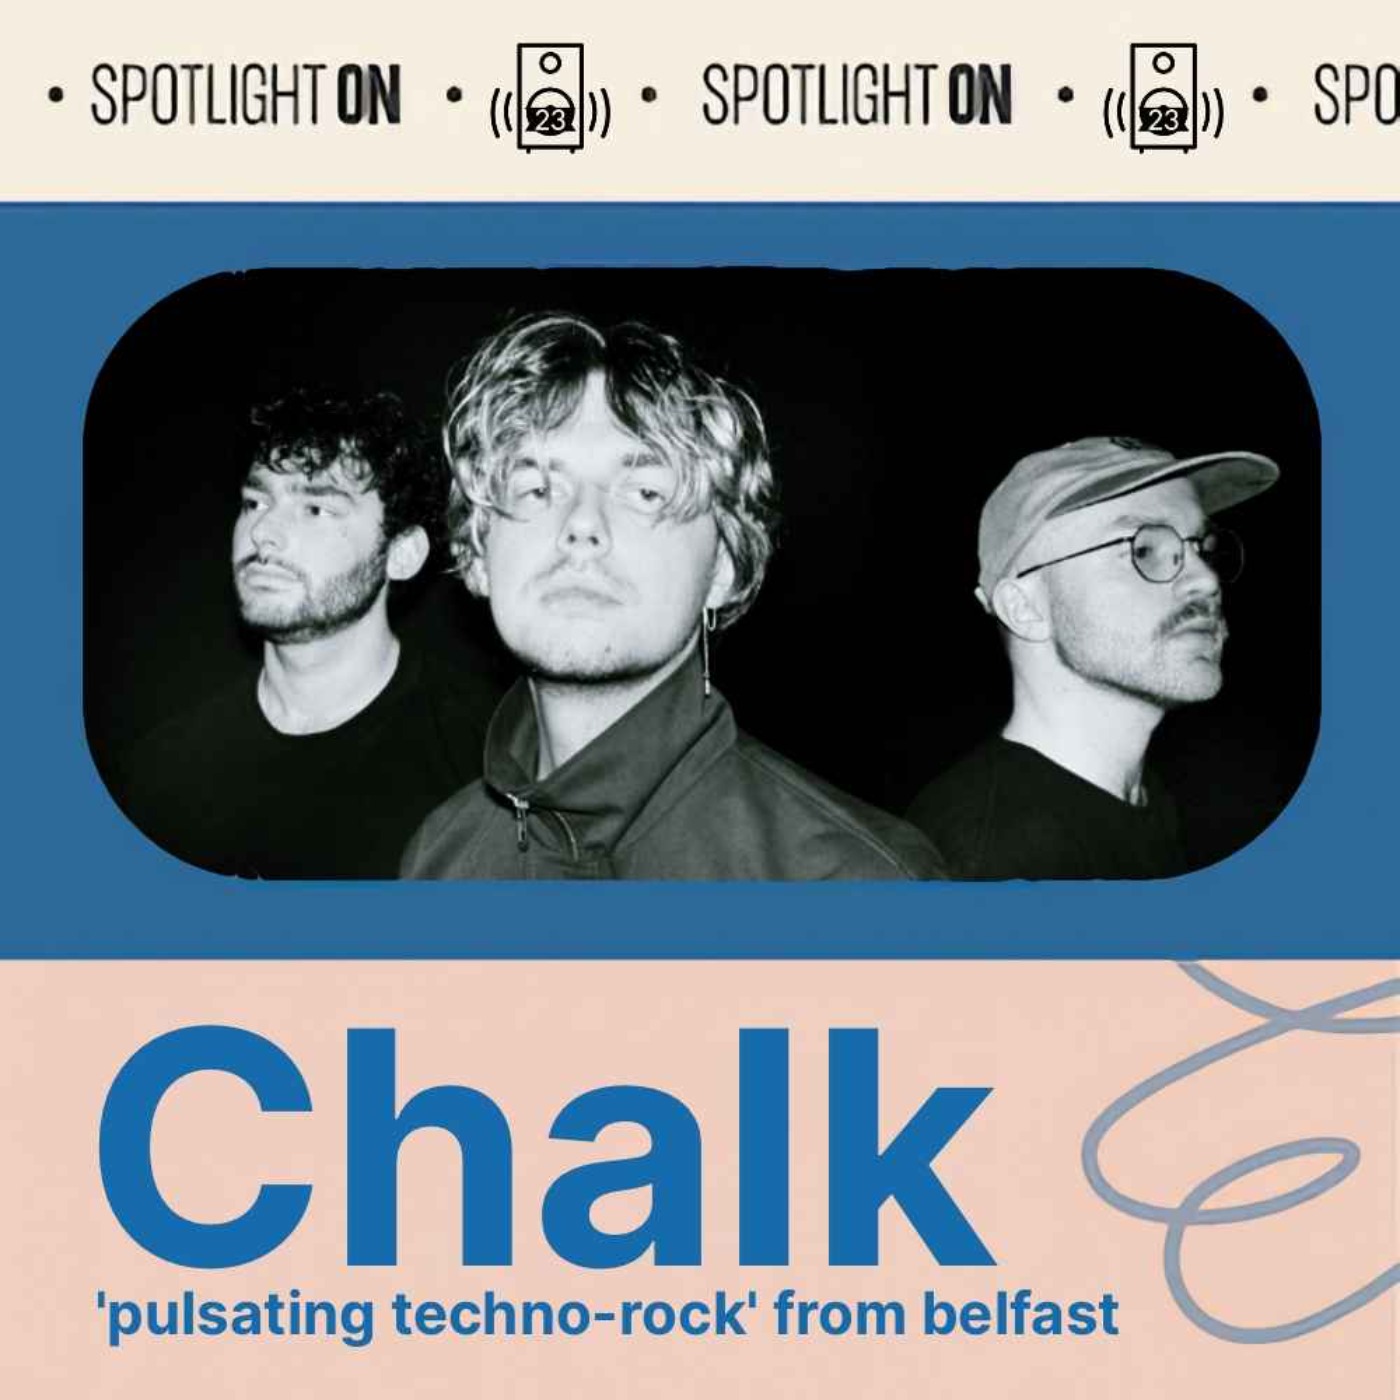 Chalk: a relentless and genre-busting band from Belfast